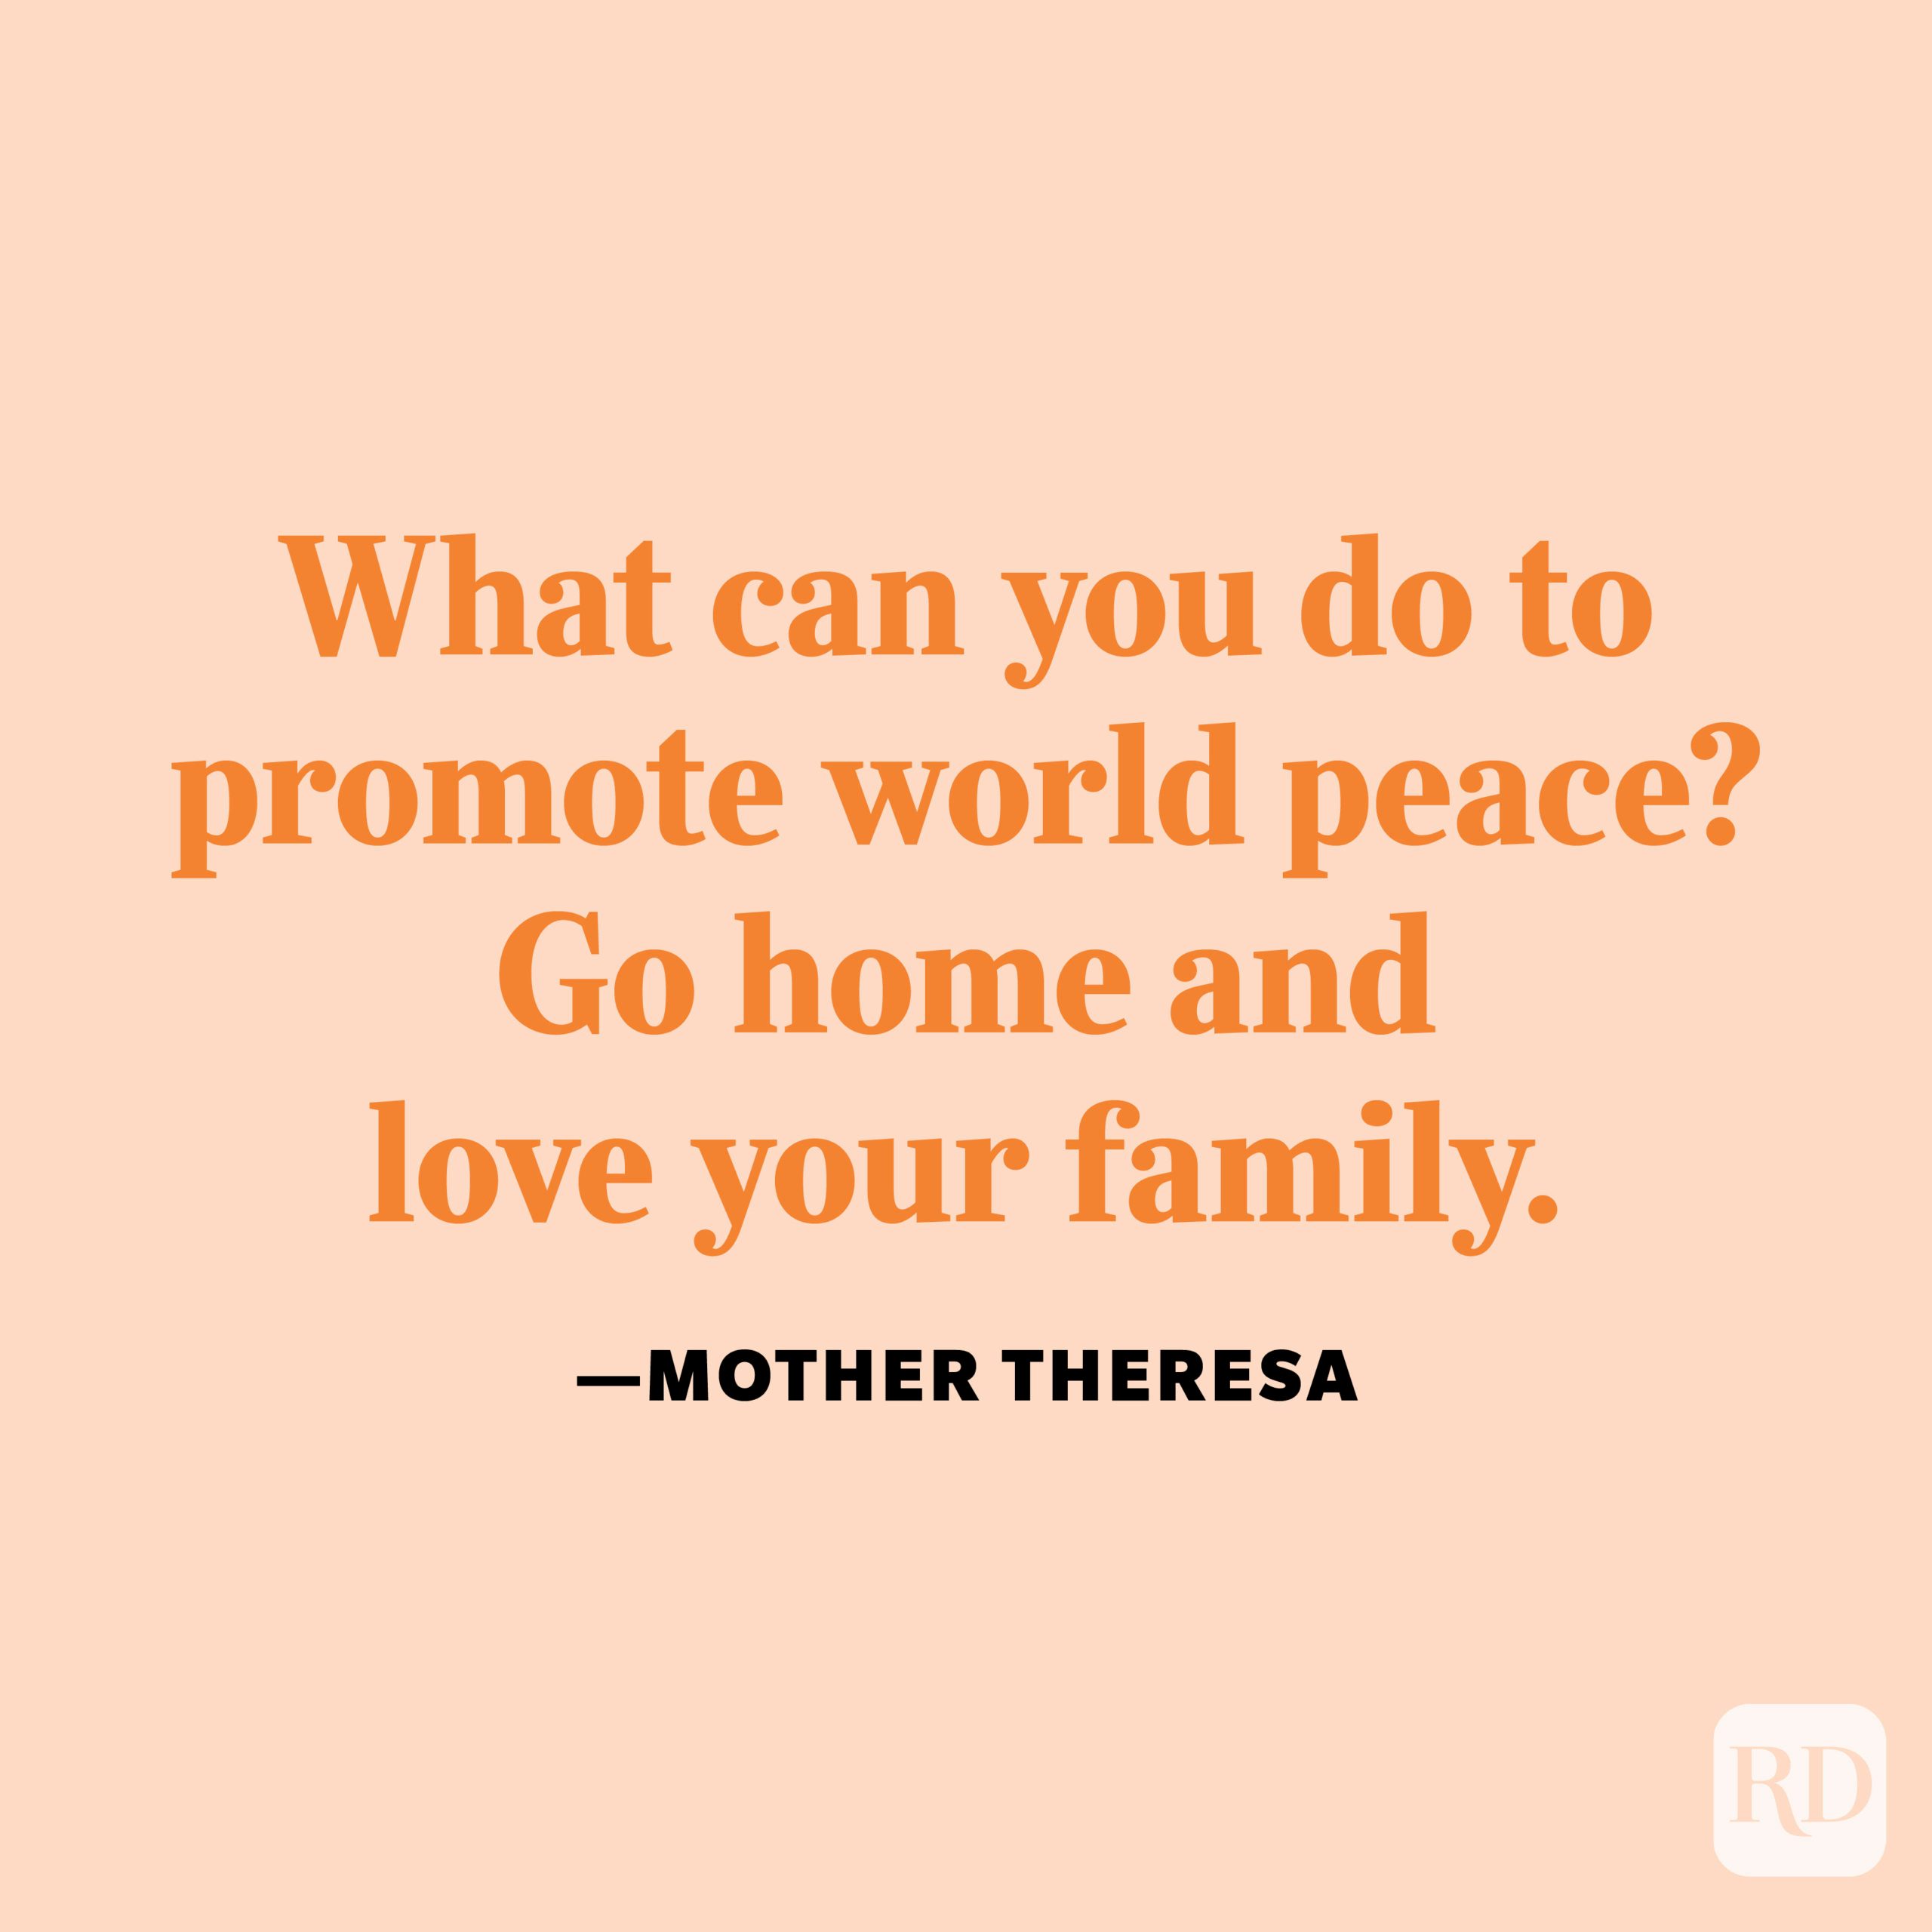 "What can you do to promote world peace? Go home and love your family." —Mother Teresa.